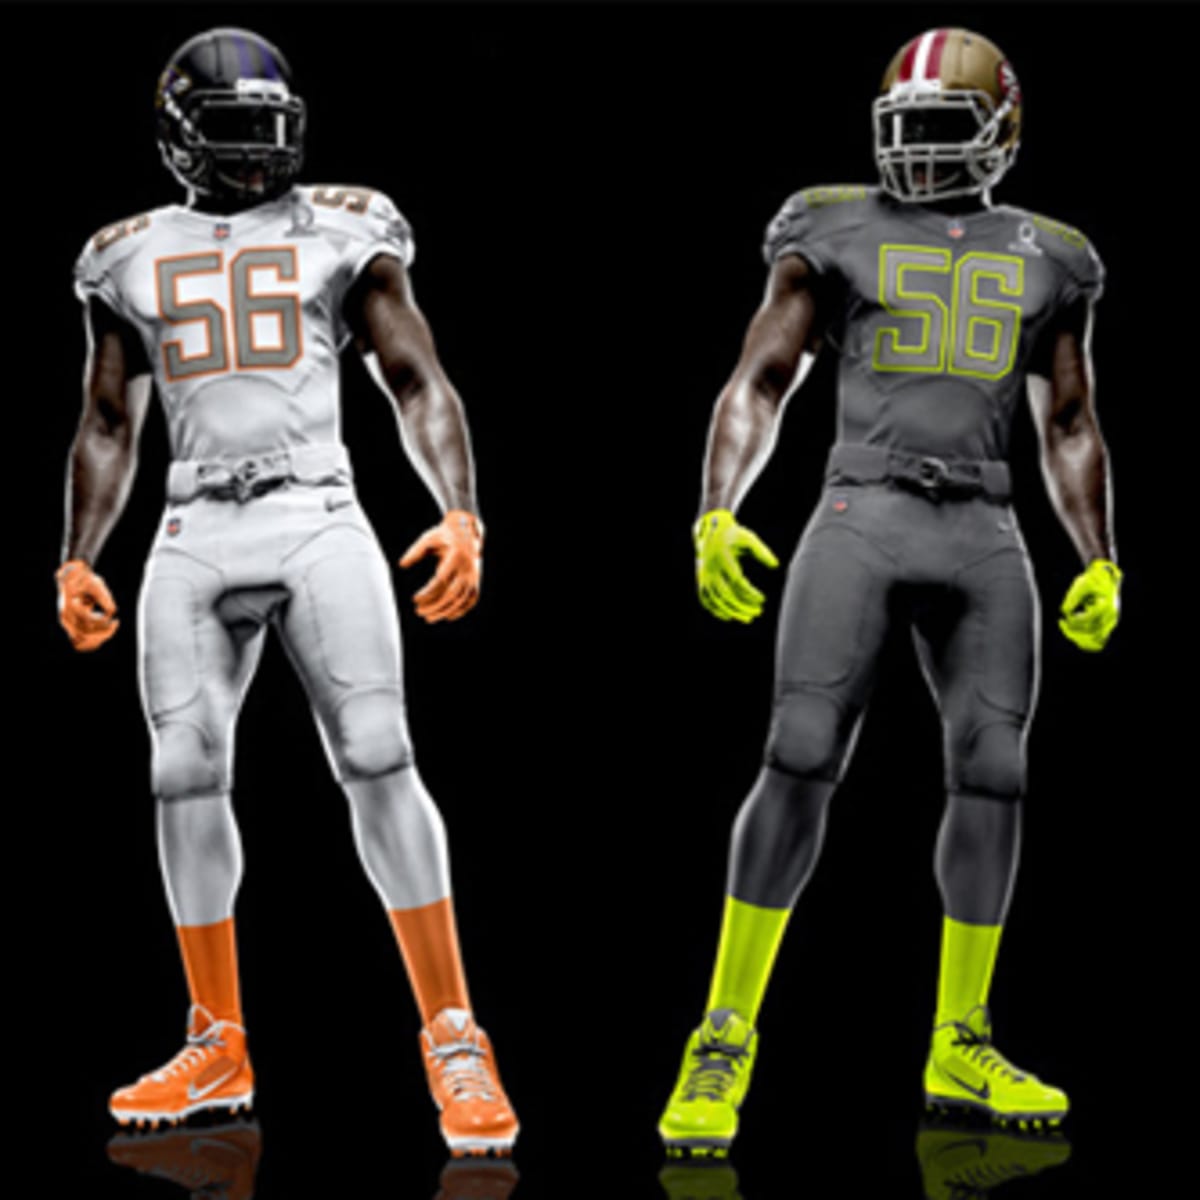 LOOK: Here's what the NFL's slick, new 2016 Pro Bowl uniforms look